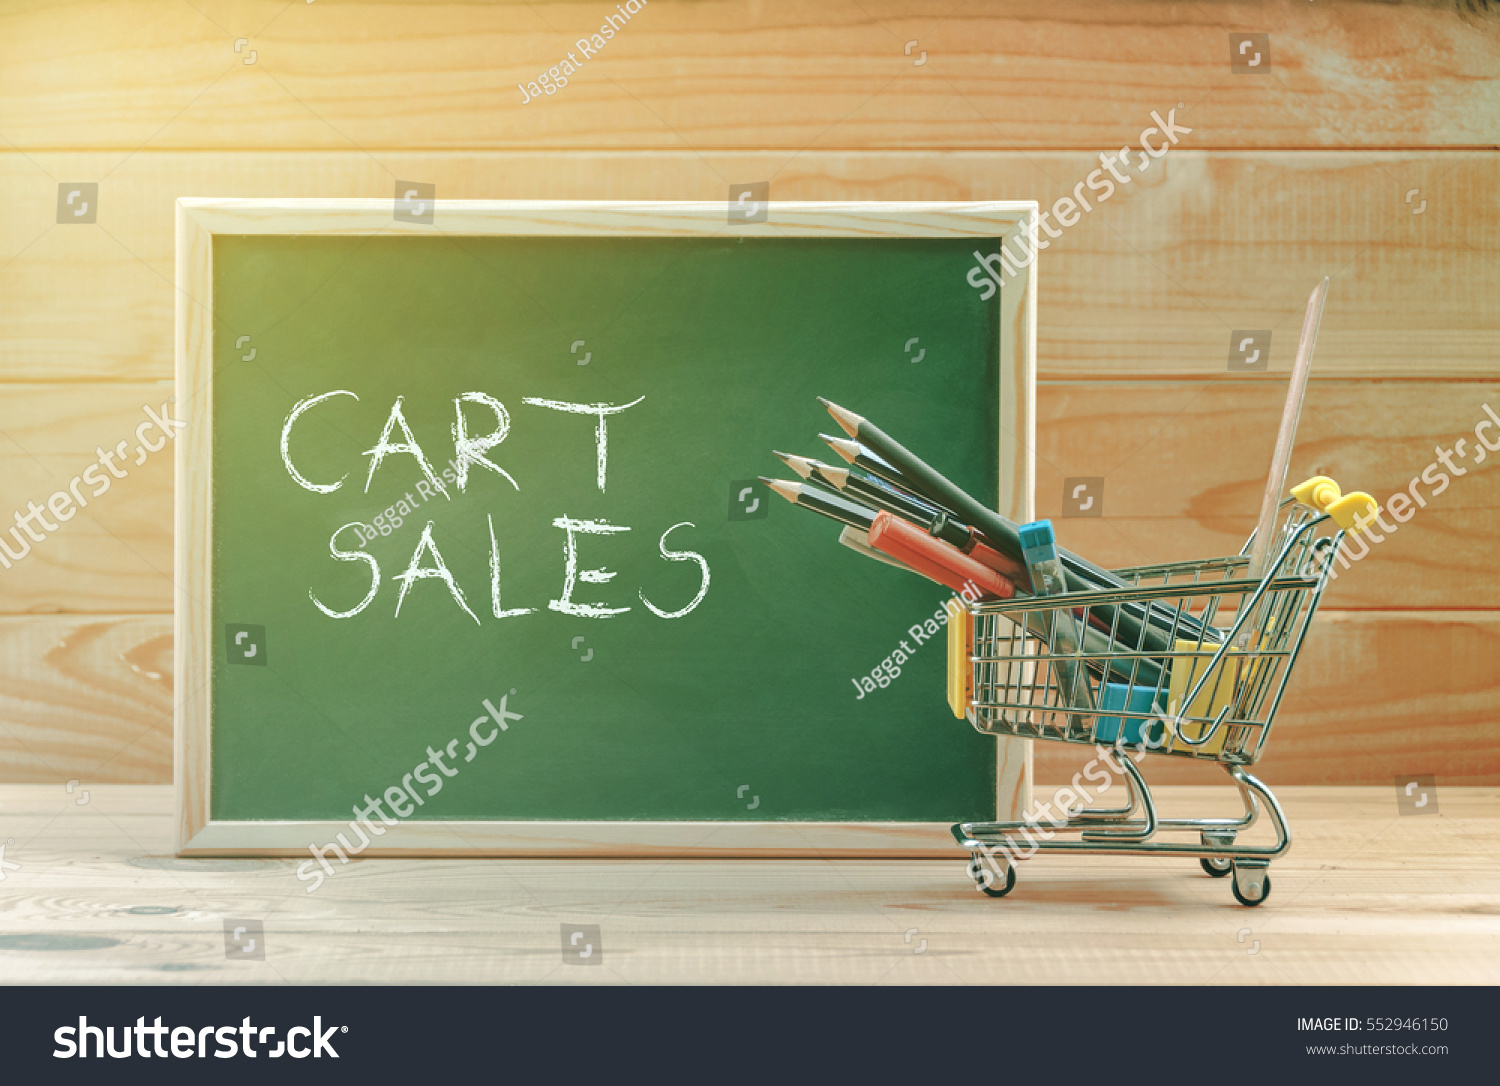 Cart sales text display on chalkboard with shopping cart #552946150